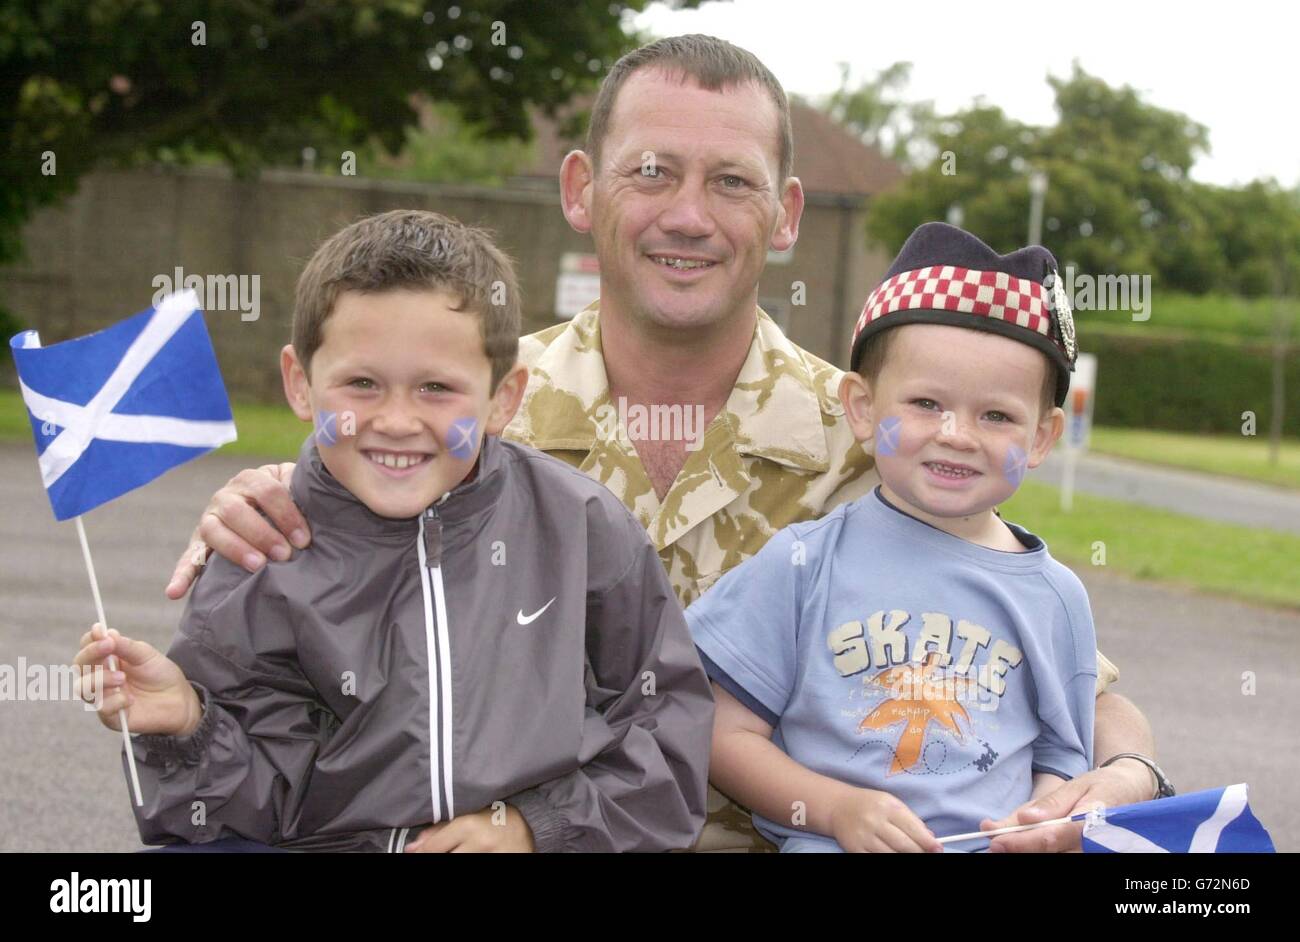 Sgt. Danny Dunn with his sons Cameron (left), 8, and Conrad, 4, at Howe Barracks, Canterbury, where more than 200 soldiers were reunited with their families. Families waved and cheered as troops of the 1st Battalion, the Argyll and Sutherland Highlanders, were officially dismissed at the Barracks. Stock Photo